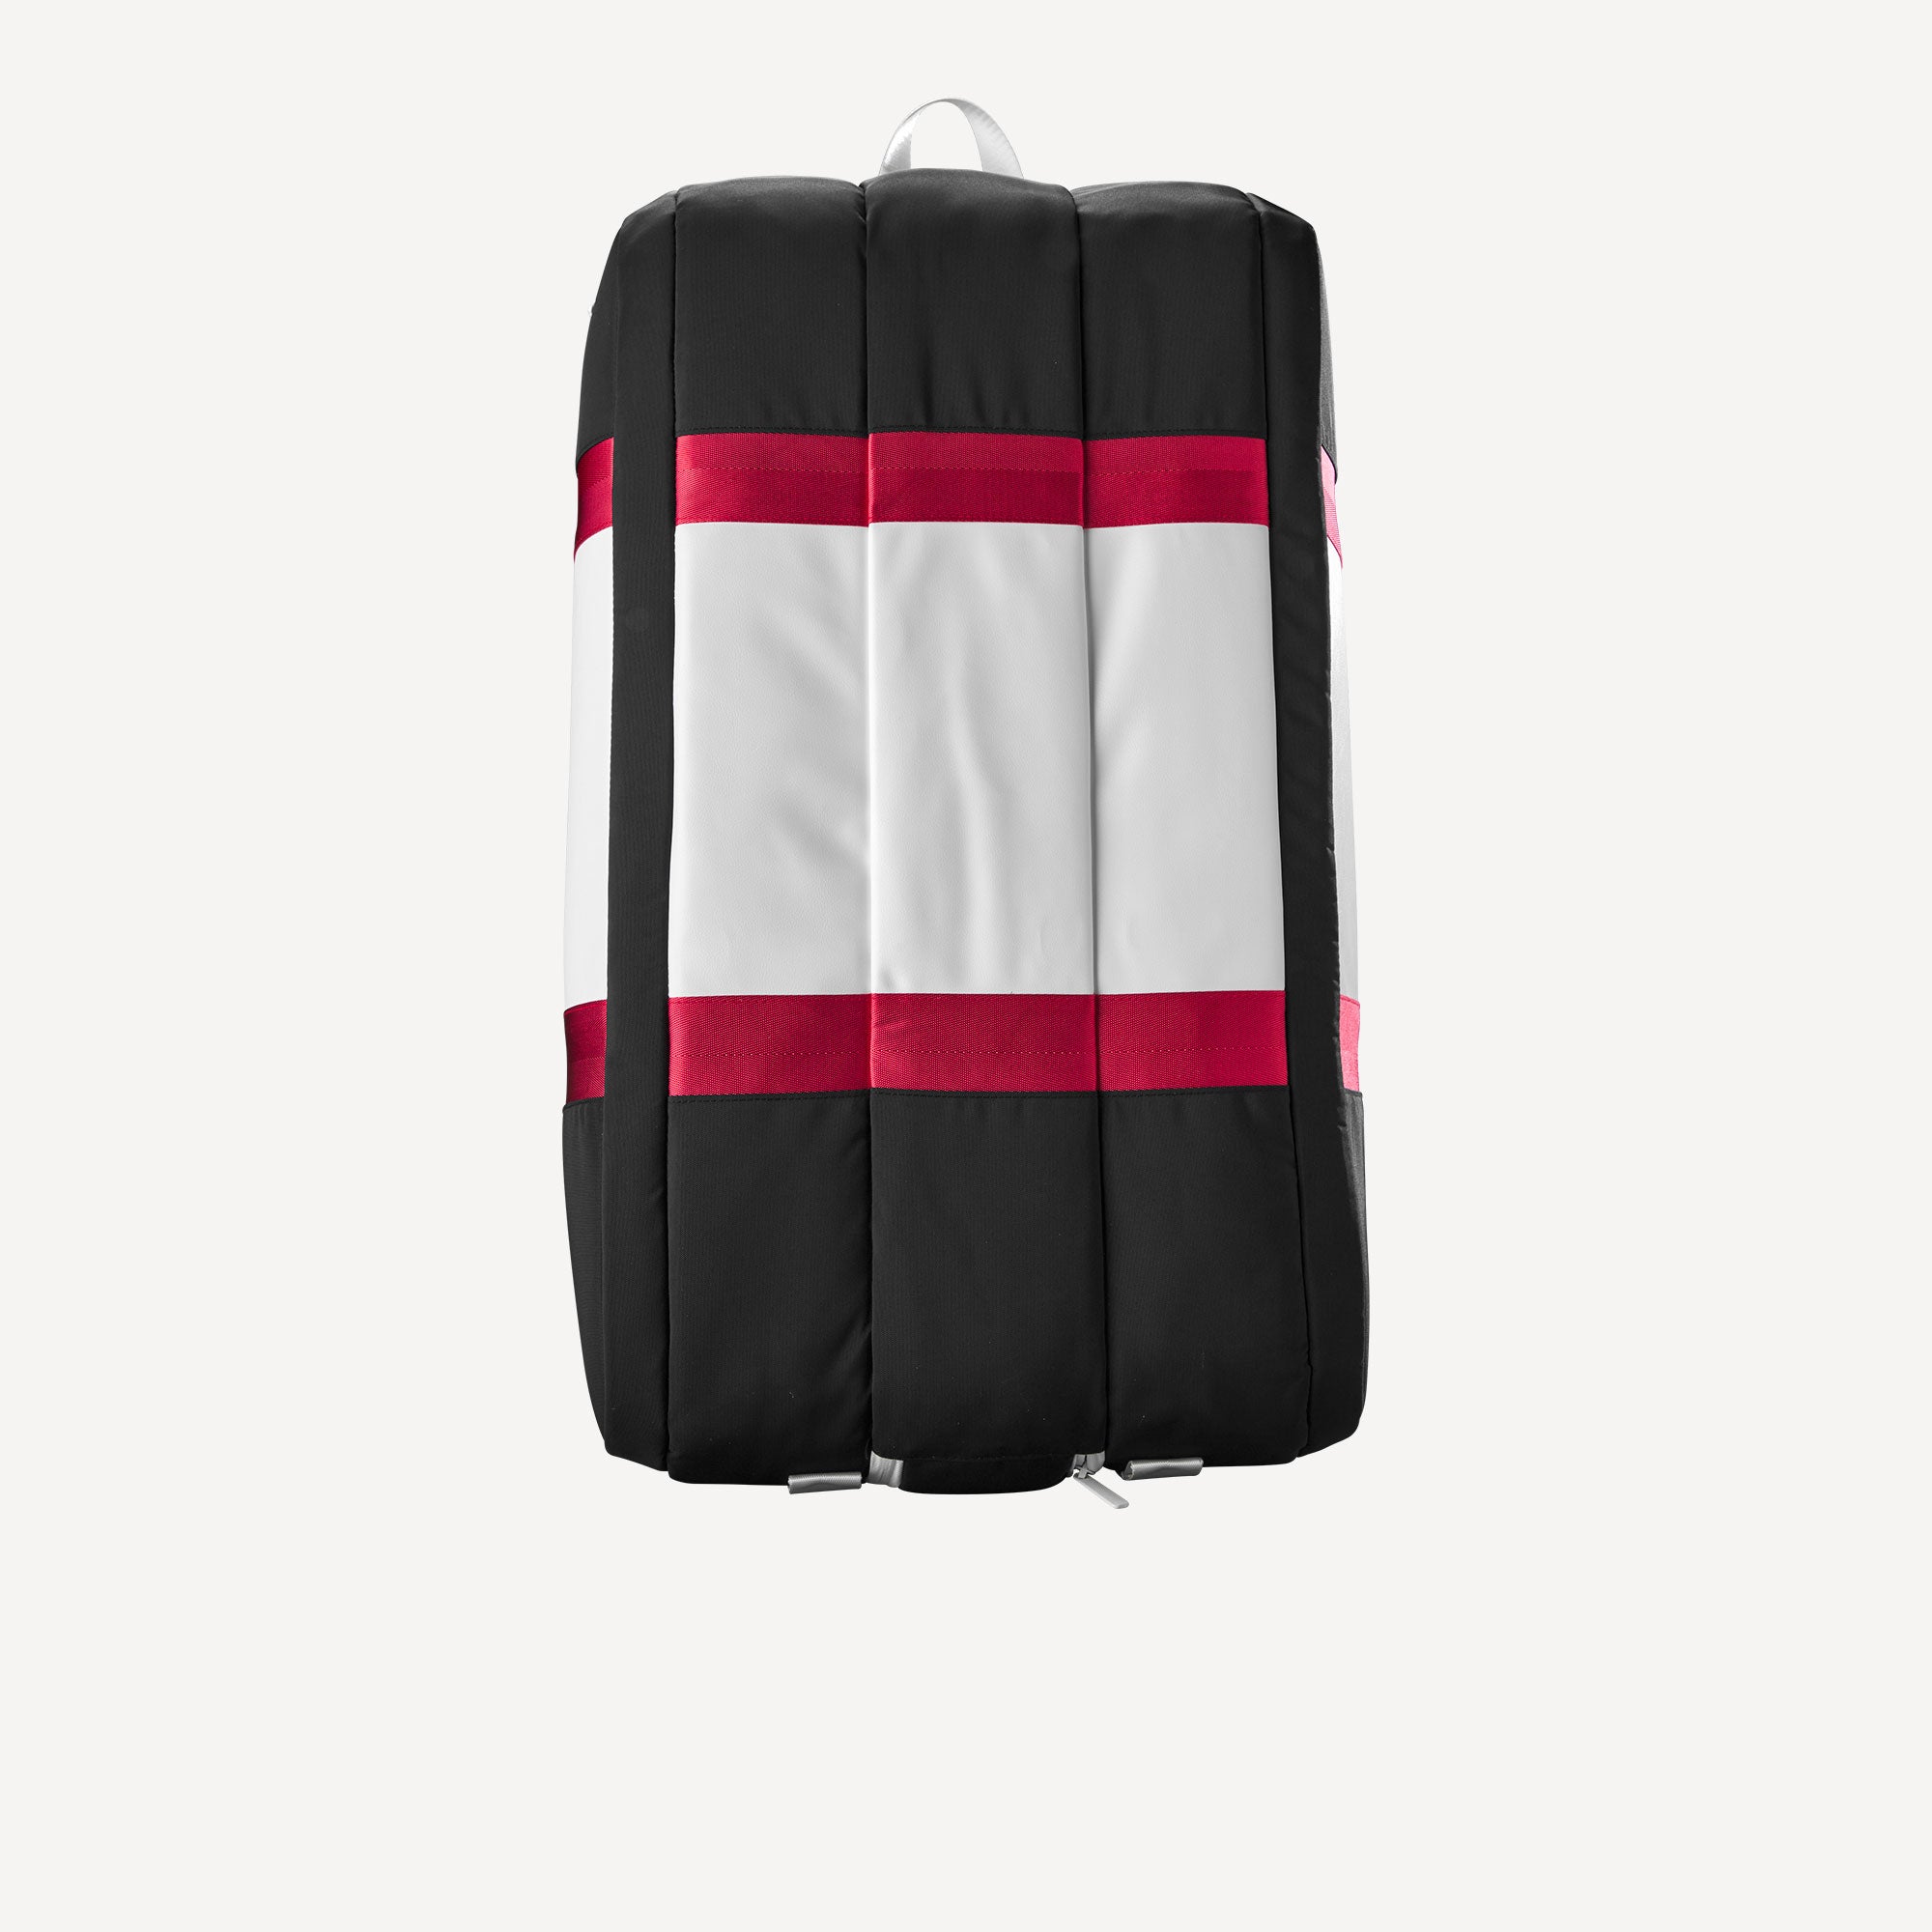 Wilson Courage Collection 15 Racket Tennis Bag - Black/White/Red (4)